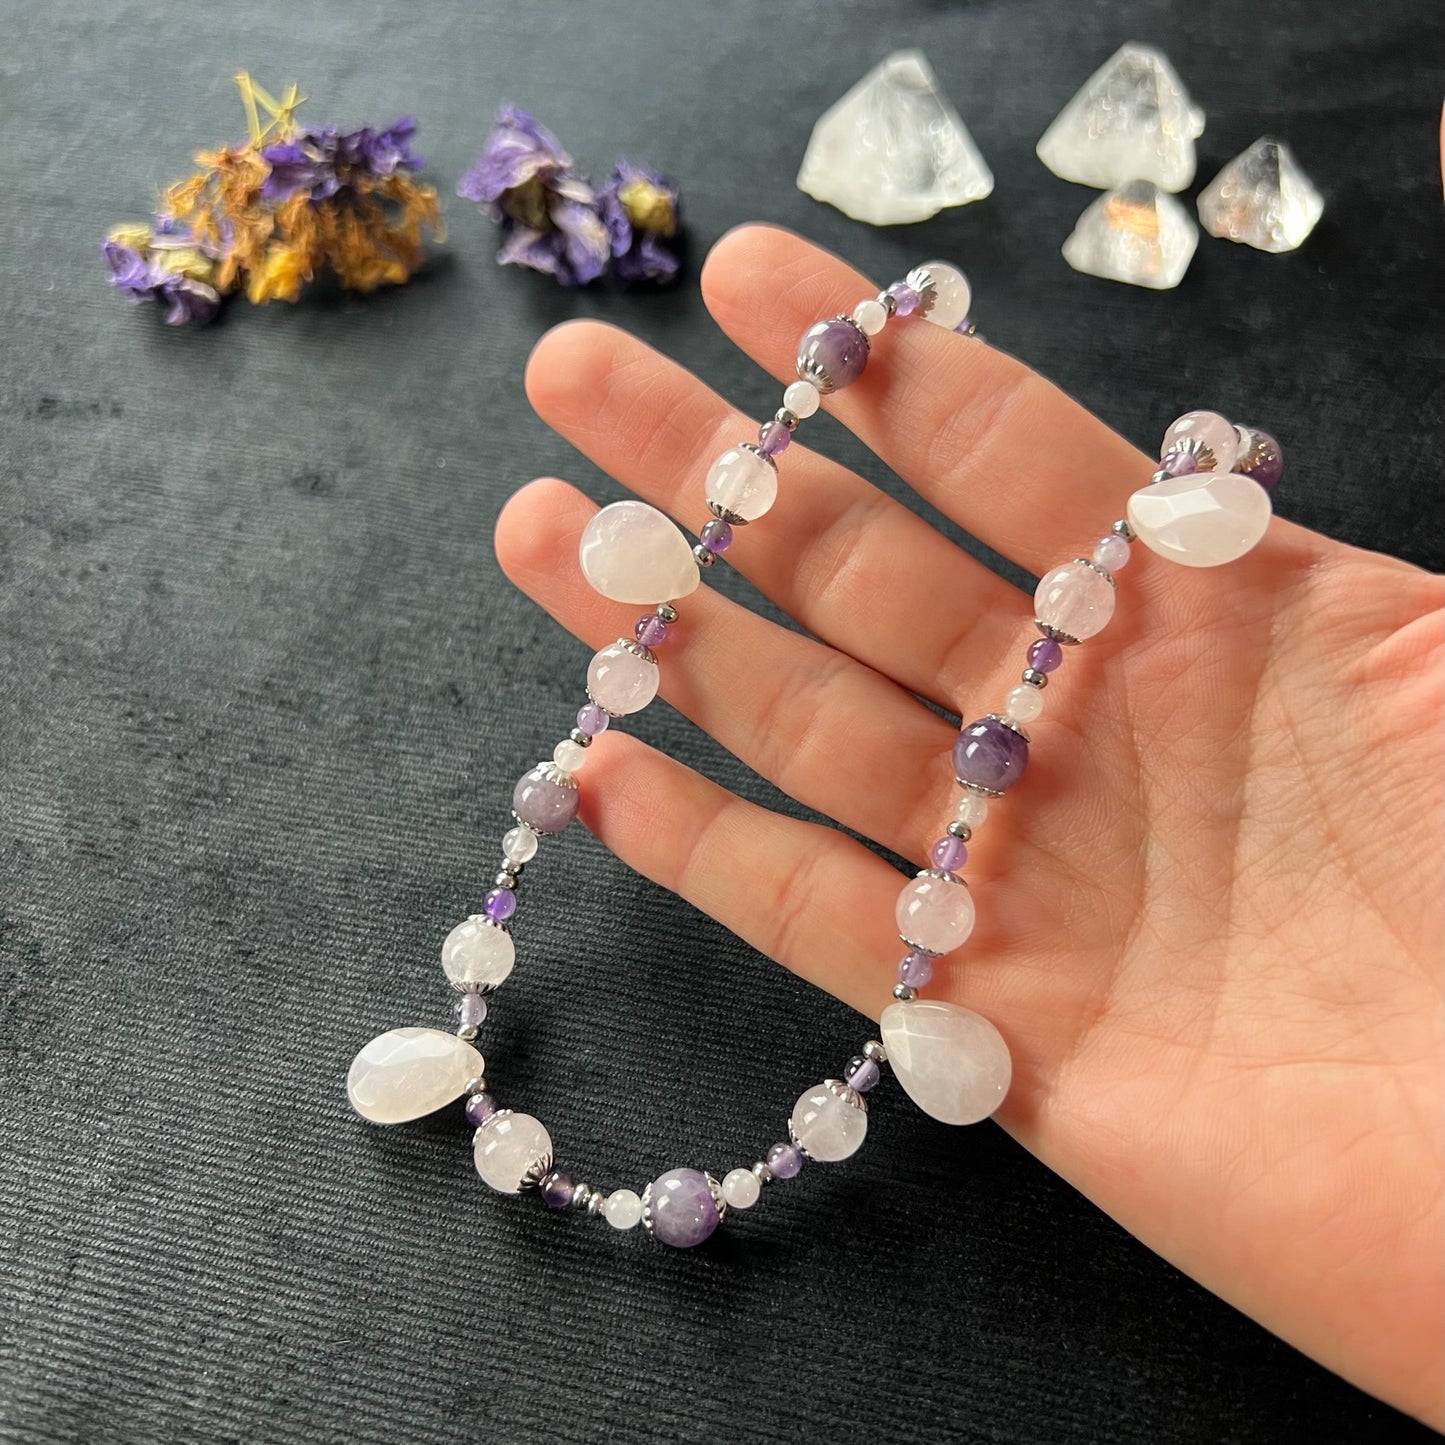 Gemstone beaded necklace quartz amethyst and stainless steel Rêveries Collection royalcore necklace gift for her